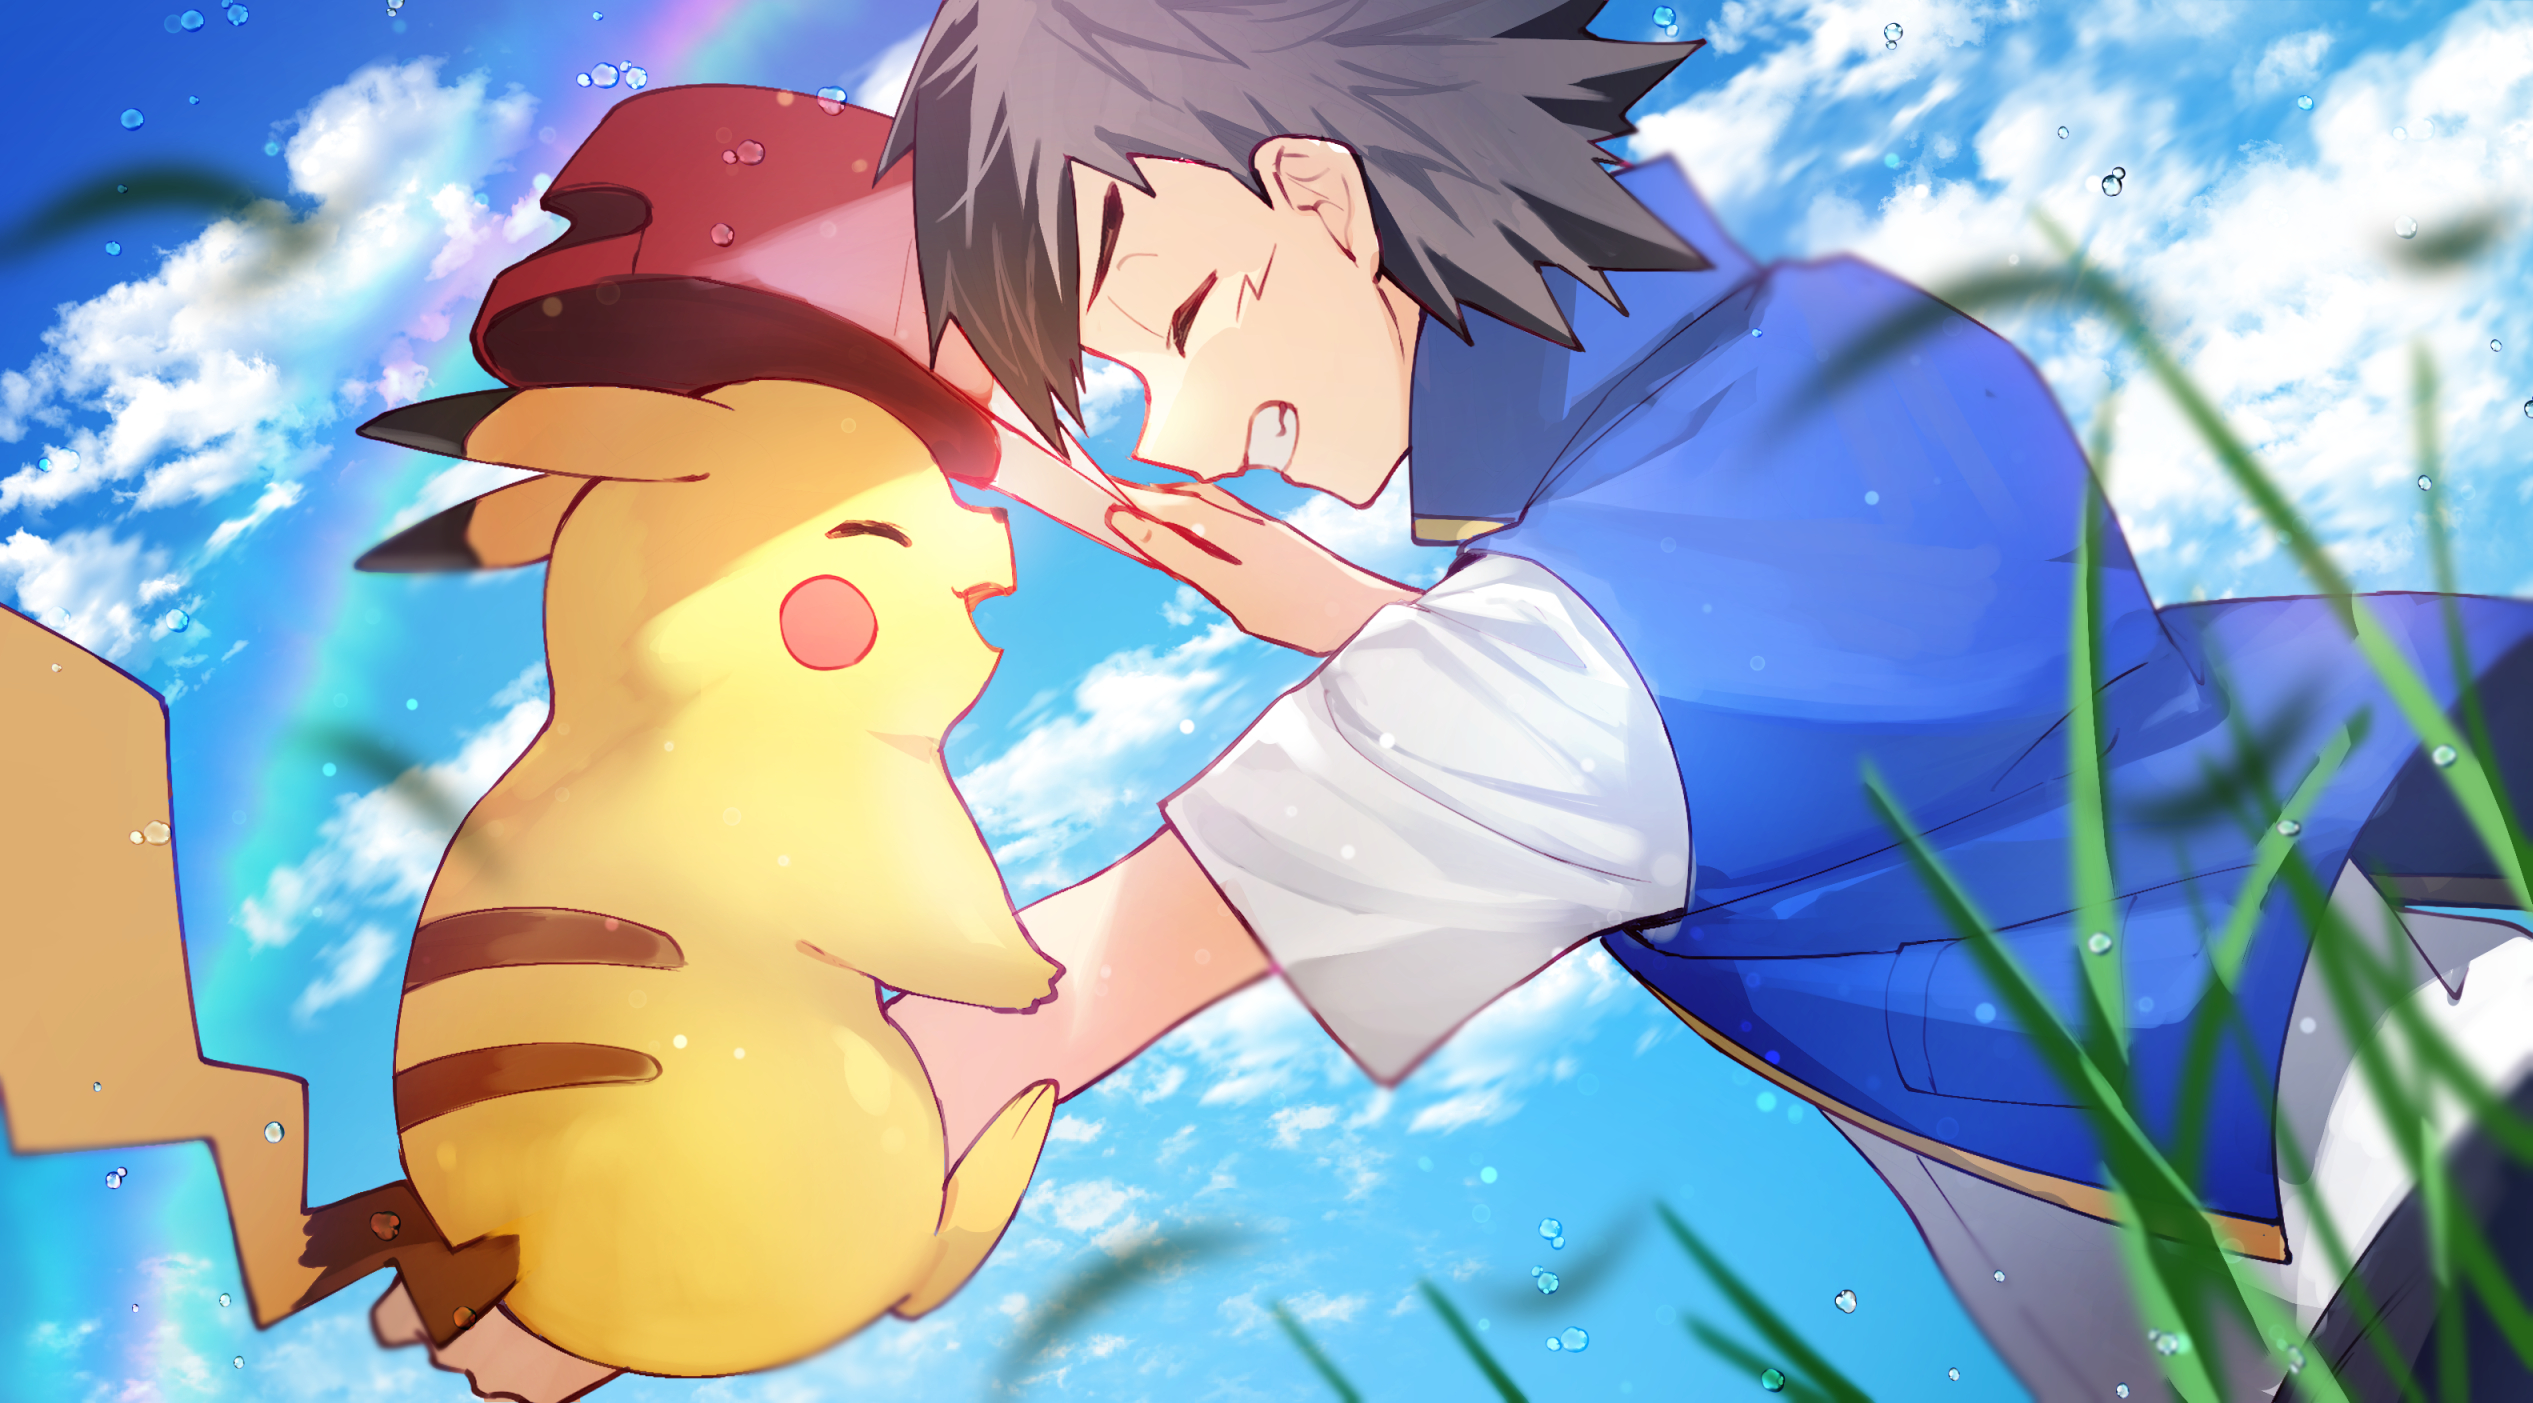 Mobile wallpaper: Anime, Pokémon, Pikachu, Ash Ketchum, 517618 download the  picture for free.